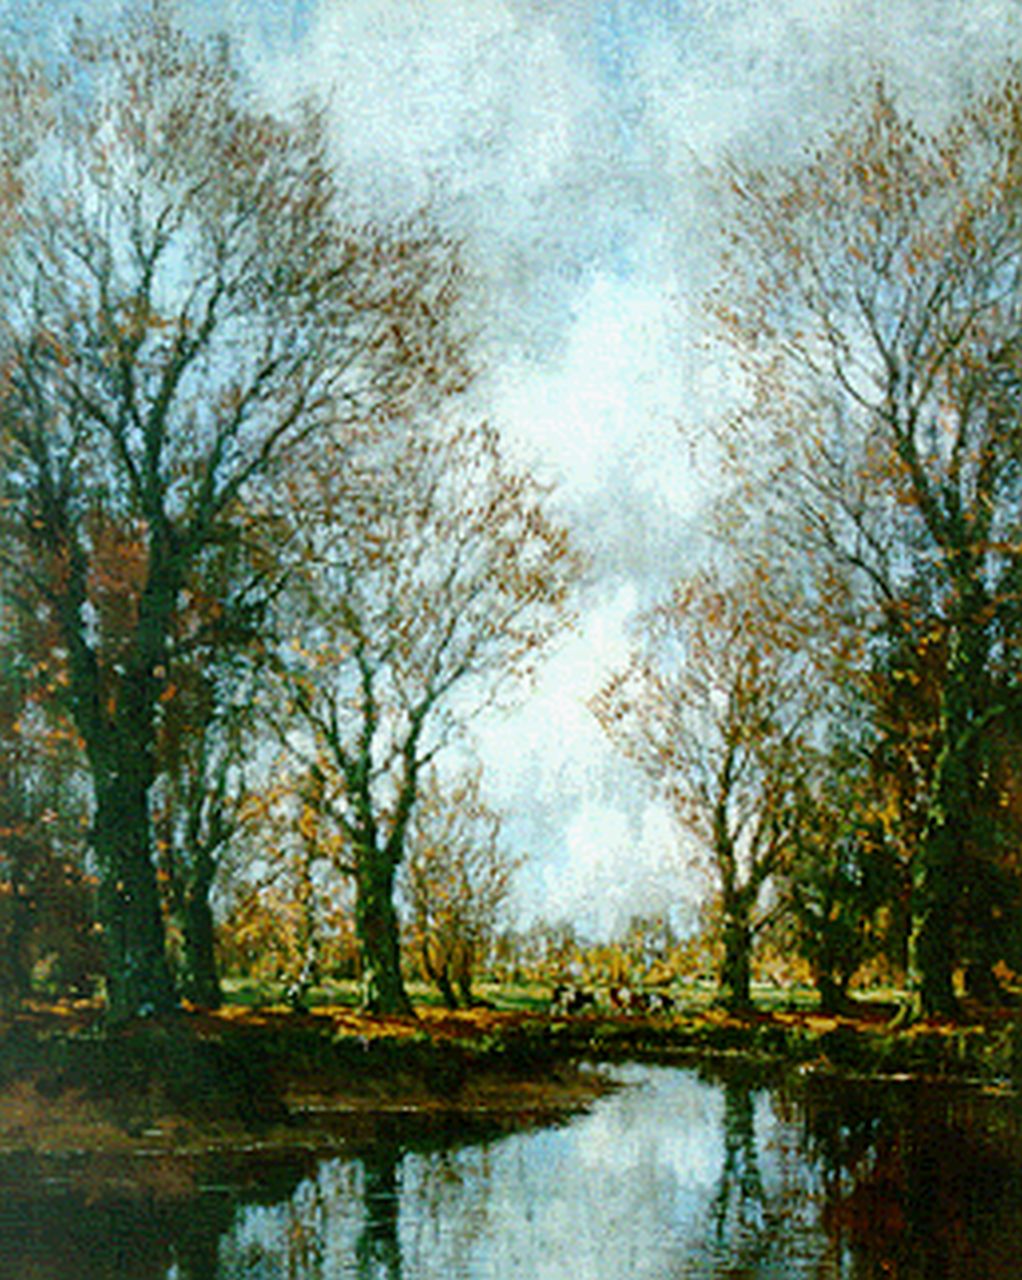 Gorter A.M.  | 'Arnold' Marc Gorter, A pond in a wooded landscape, oil on canvas 50.4 x 40.5 cm, signed l.r.